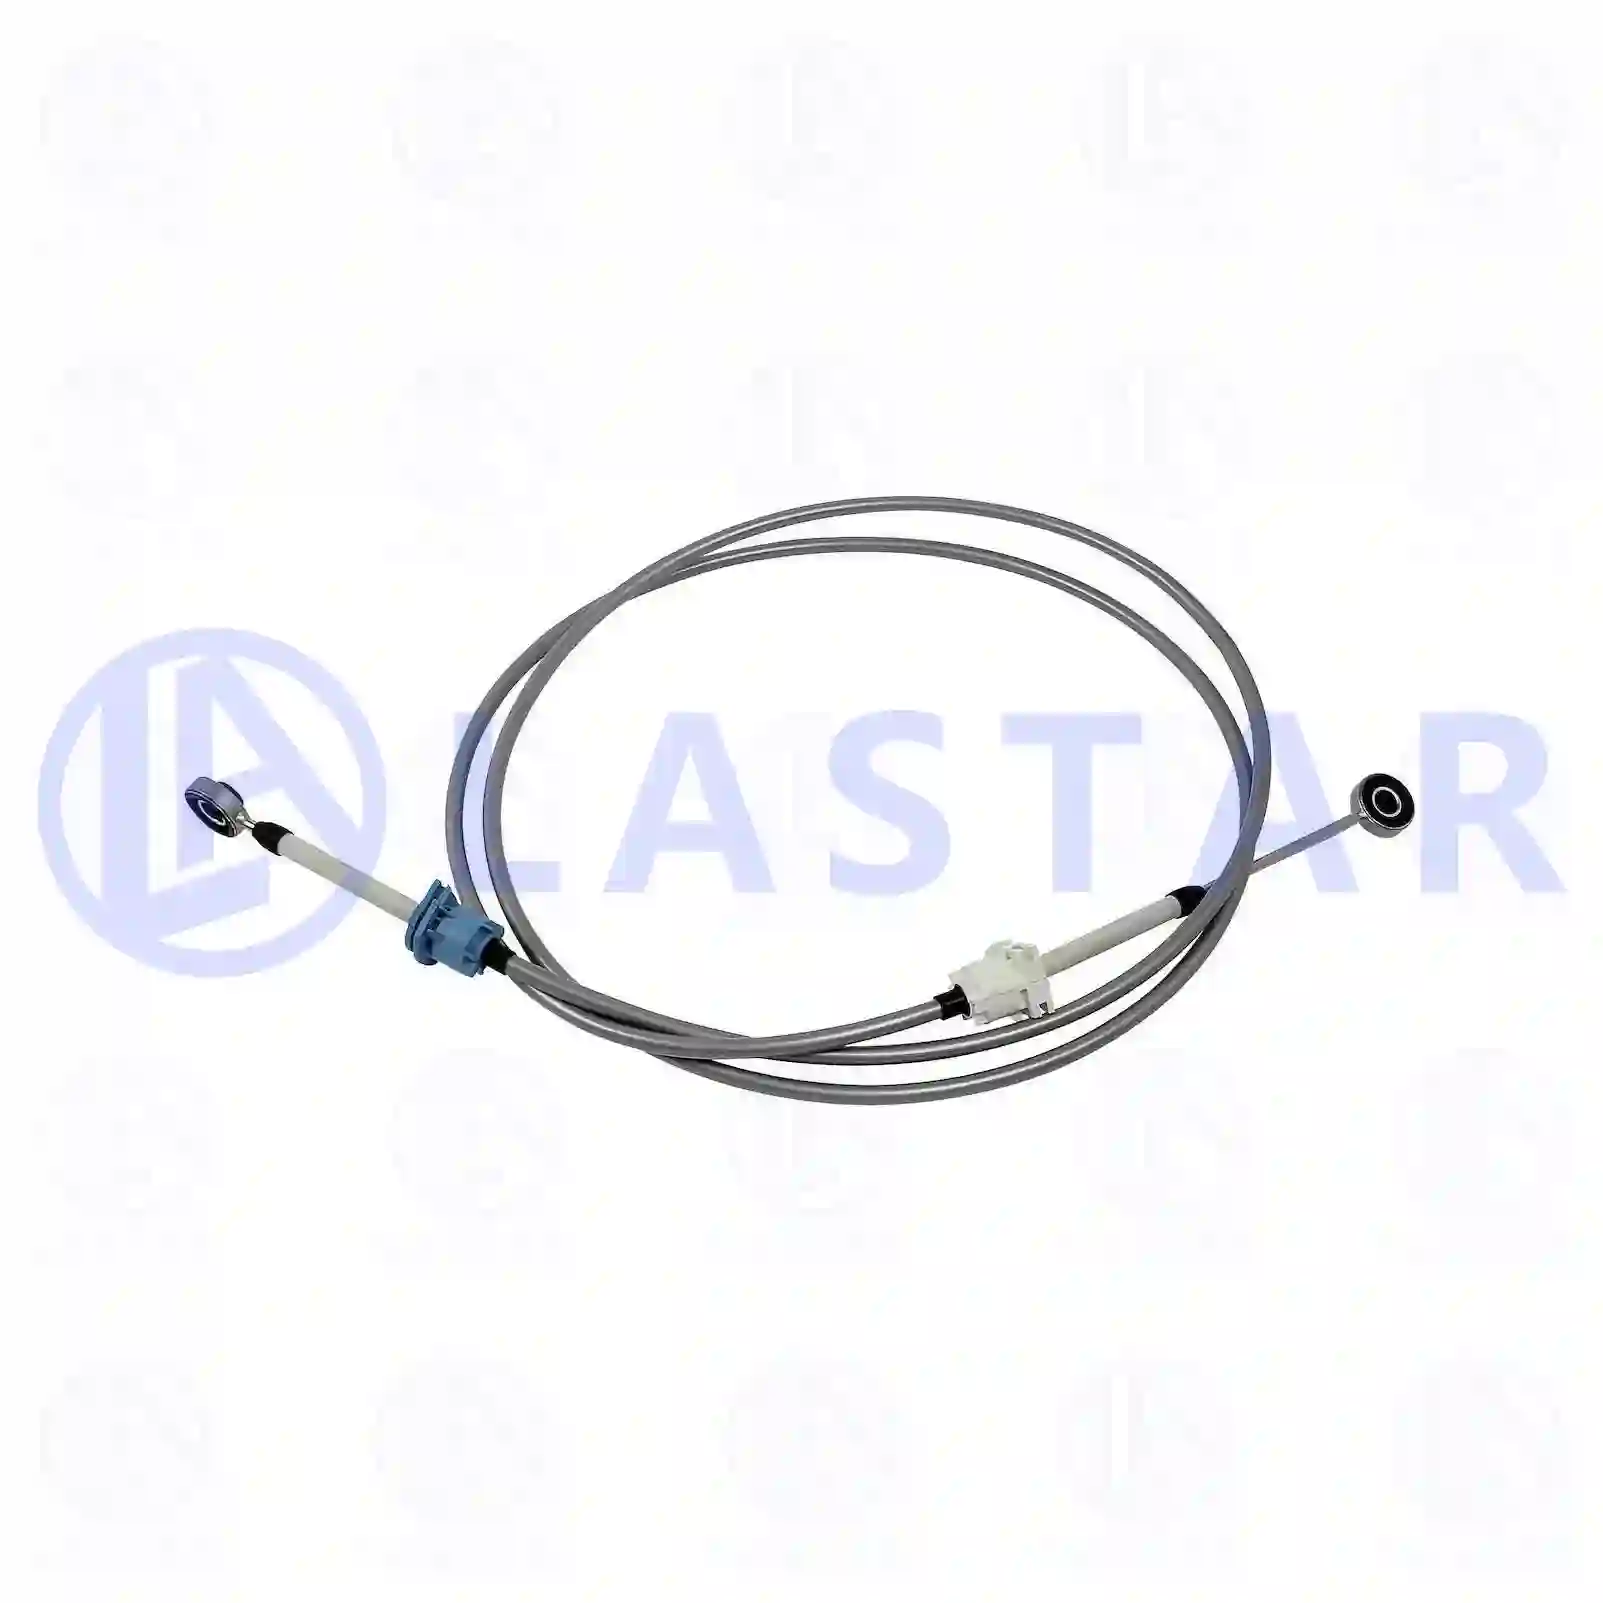 Control cable, switching, 77732681, 21002847, 21343547, 21789663 ||  77732681 Lastar Spare Part | Truck Spare Parts, Auotomotive Spare Parts Control cable, switching, 77732681, 21002847, 21343547, 21789663 ||  77732681 Lastar Spare Part | Truck Spare Parts, Auotomotive Spare Parts